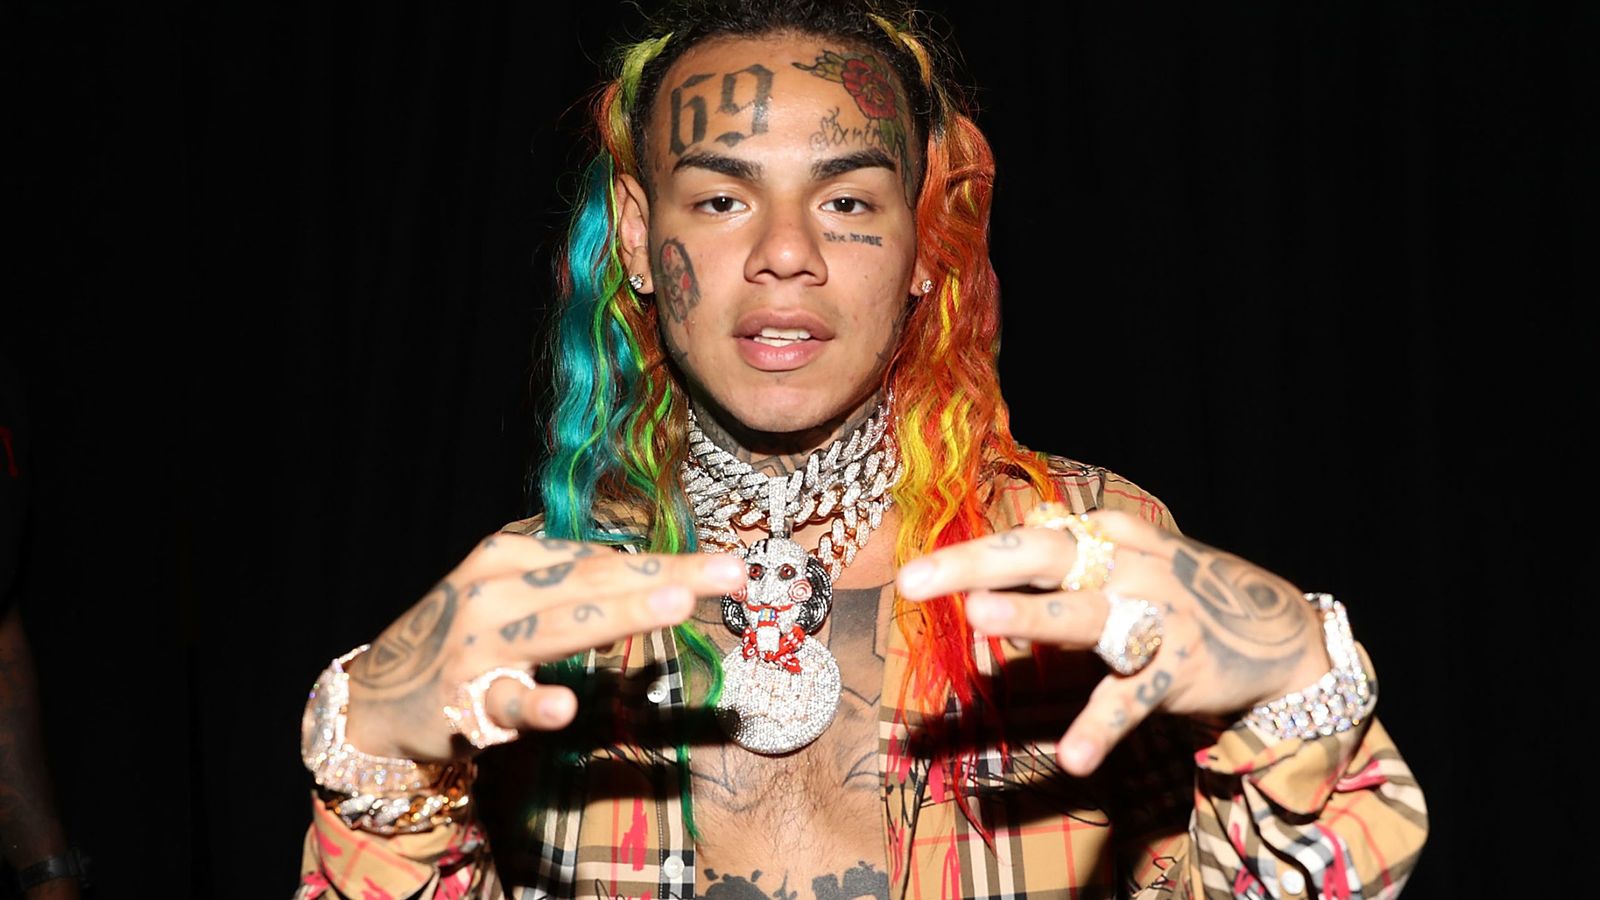 Tekashi 6ix9ine Rapper Has 200 000 Donation Rejected By No Kid Hungry Charity Ents Arts News Sky News